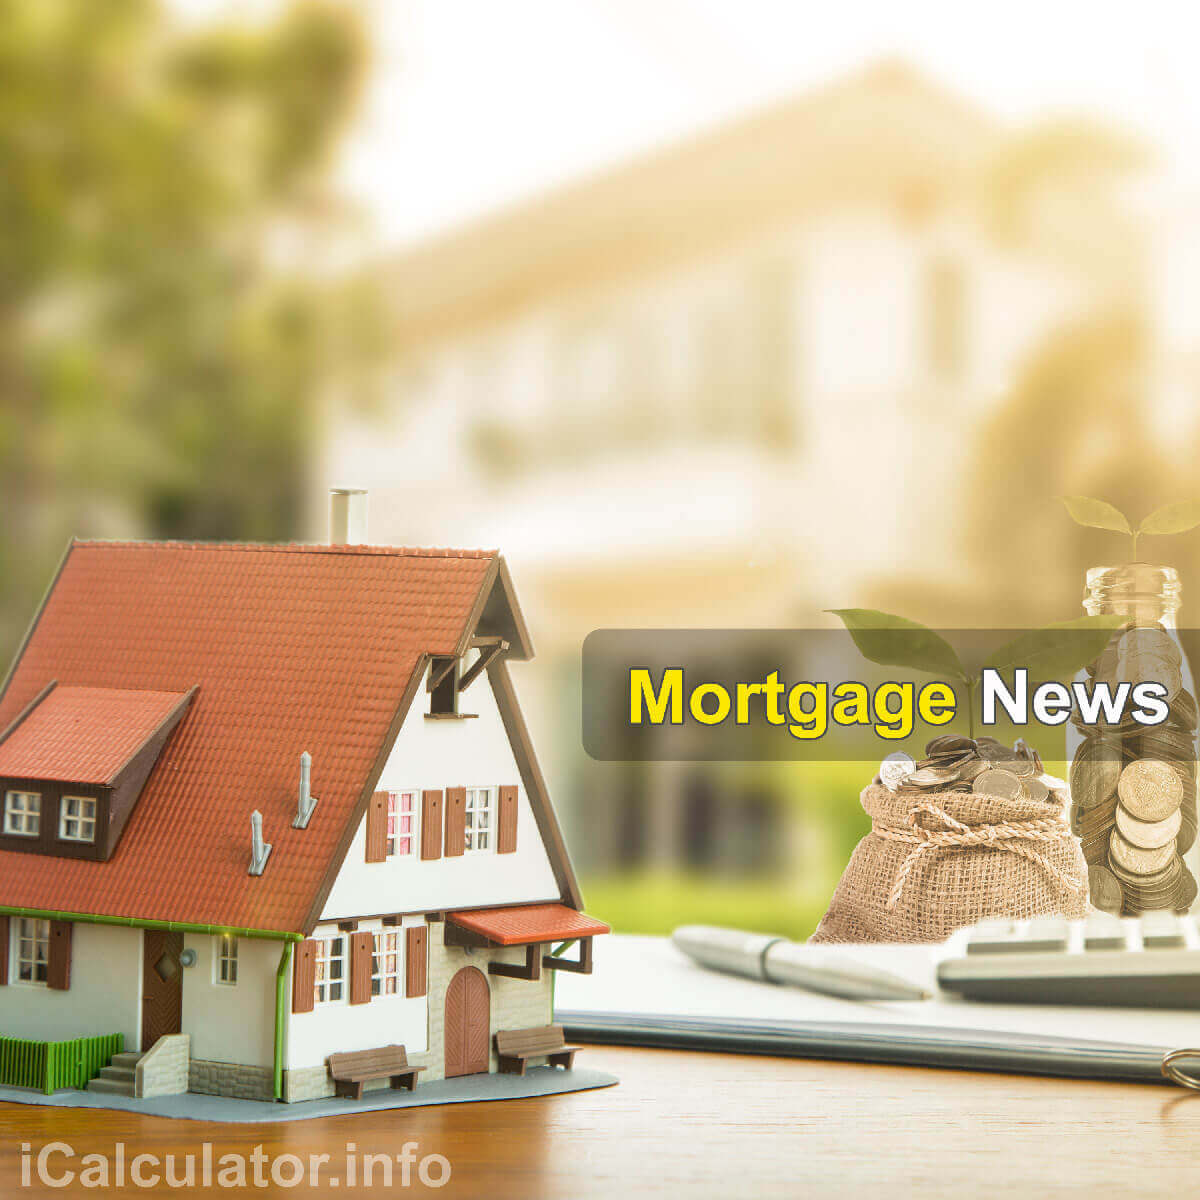 UK Mortgage News. Mortgage News: Mortgage lending has shown positive growth despite the Brexit turmoil. The number of mortgages which have been approved recently by the UK lenders has shown a drastic growth